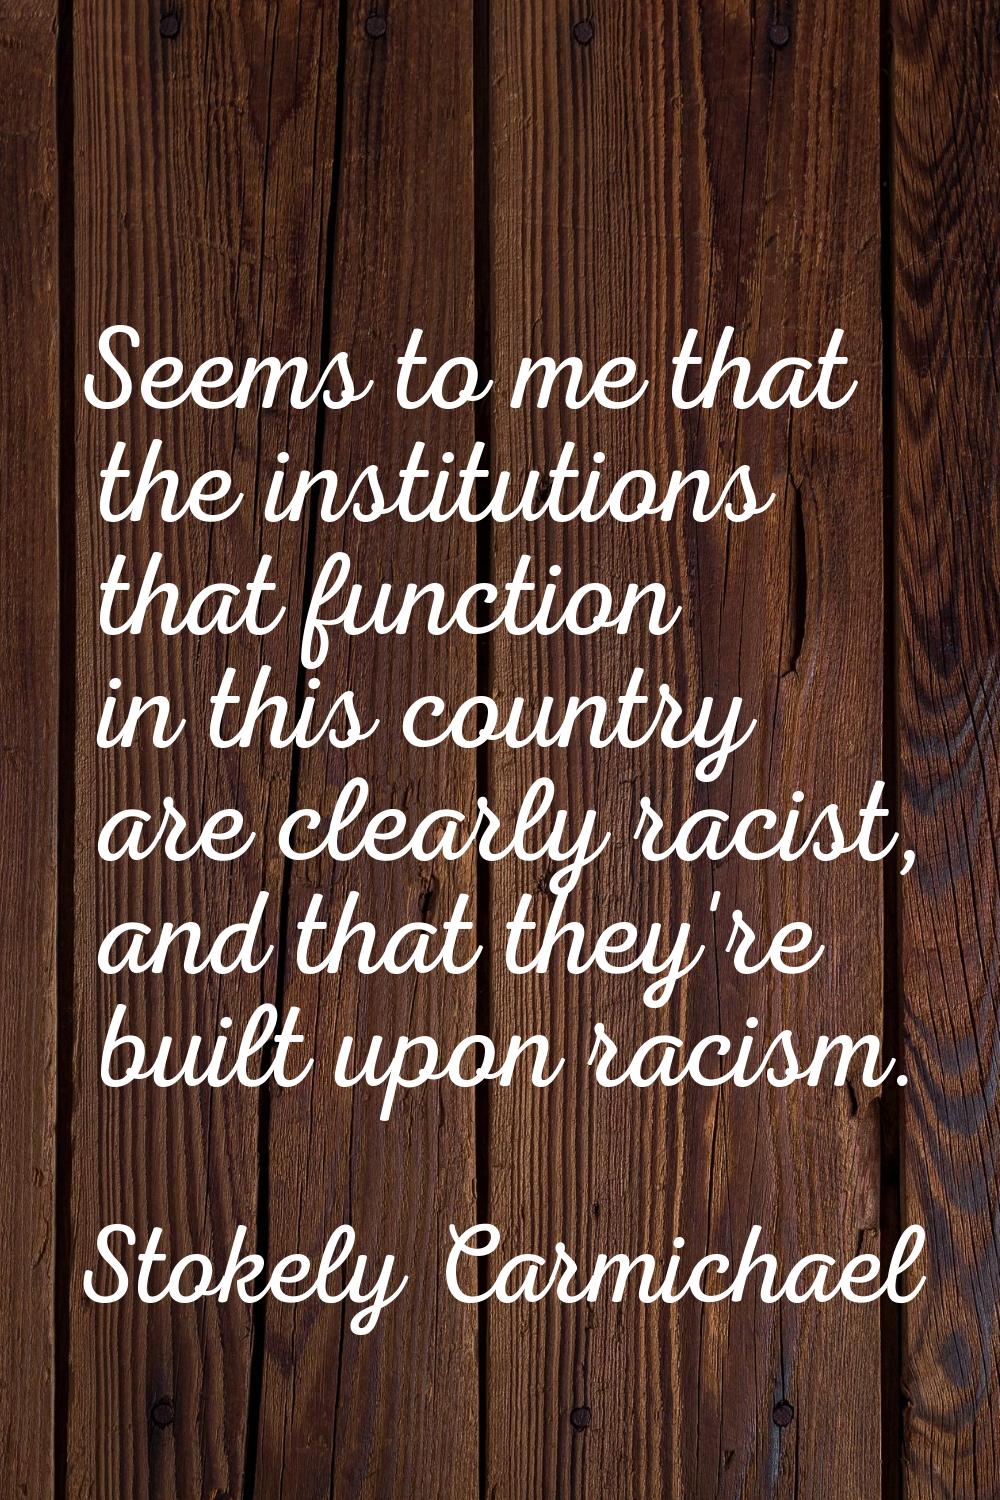 Seems to me that the institutions that function in this country are clearly racist, and that they'r